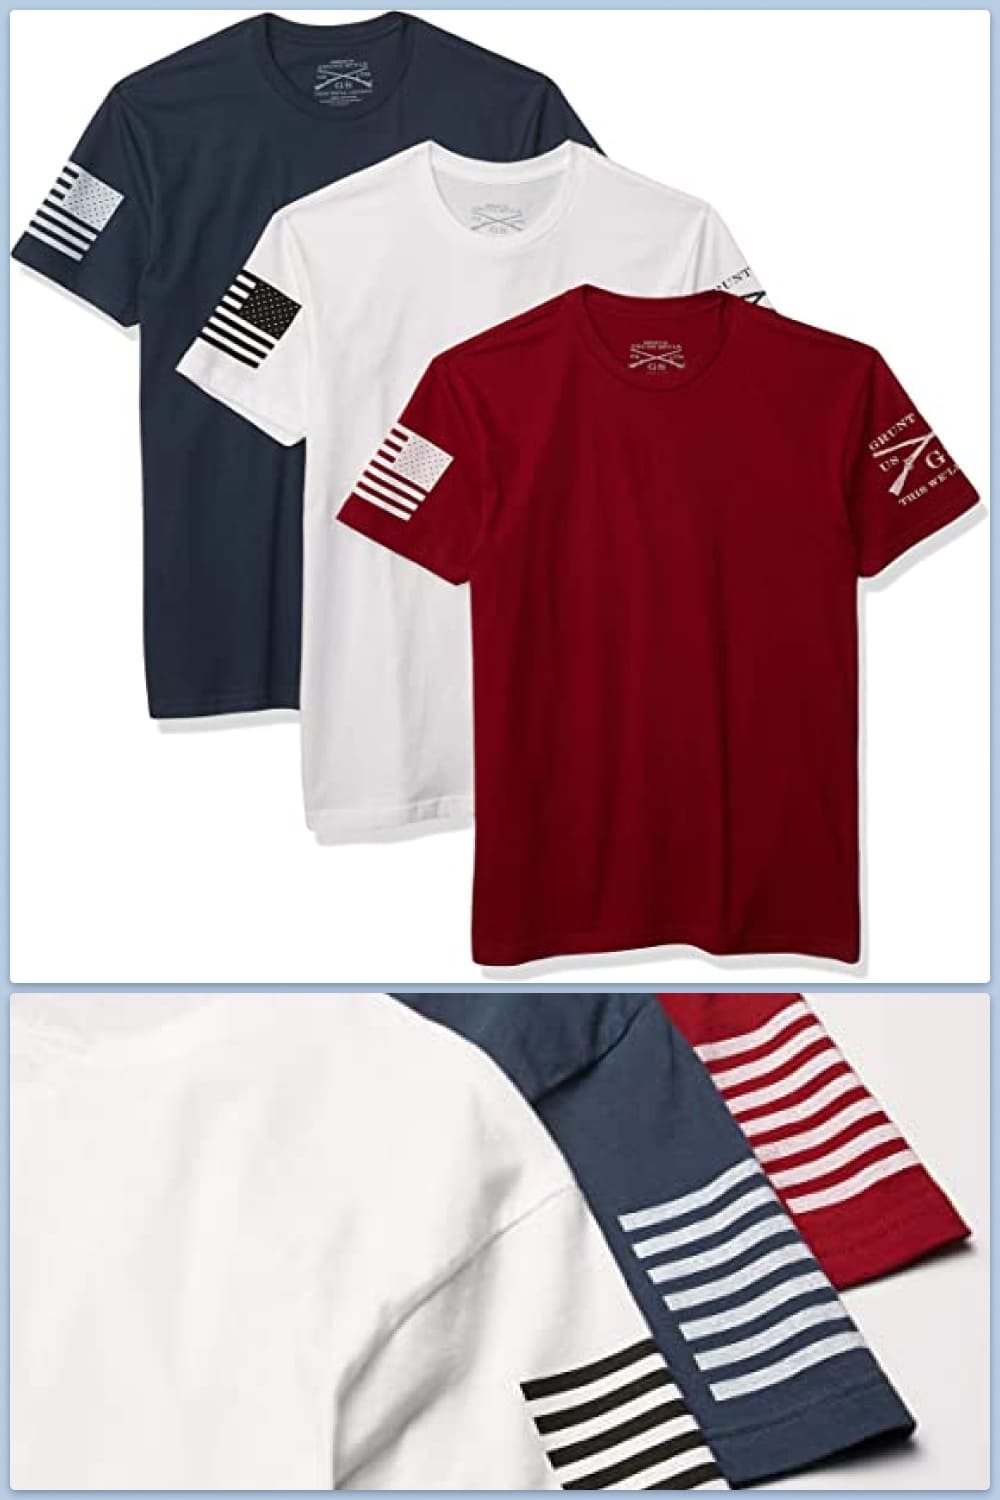 Black, white and red t-shirts with a flag on the sleeve.